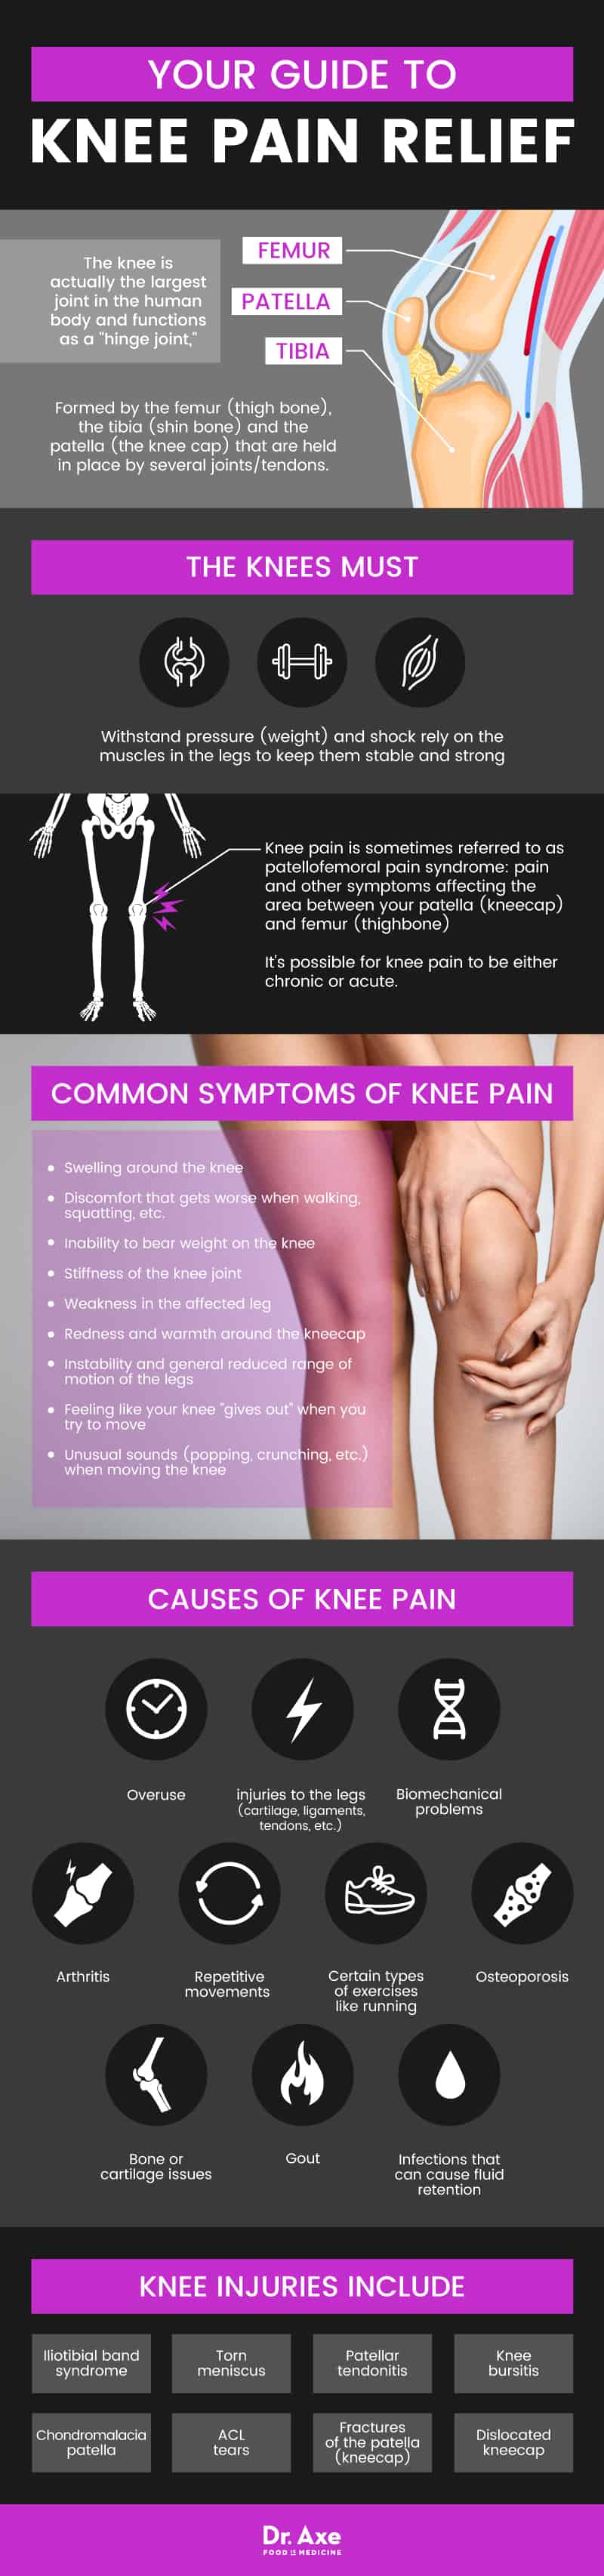 Guide to knee pain relief - Dr. Axe